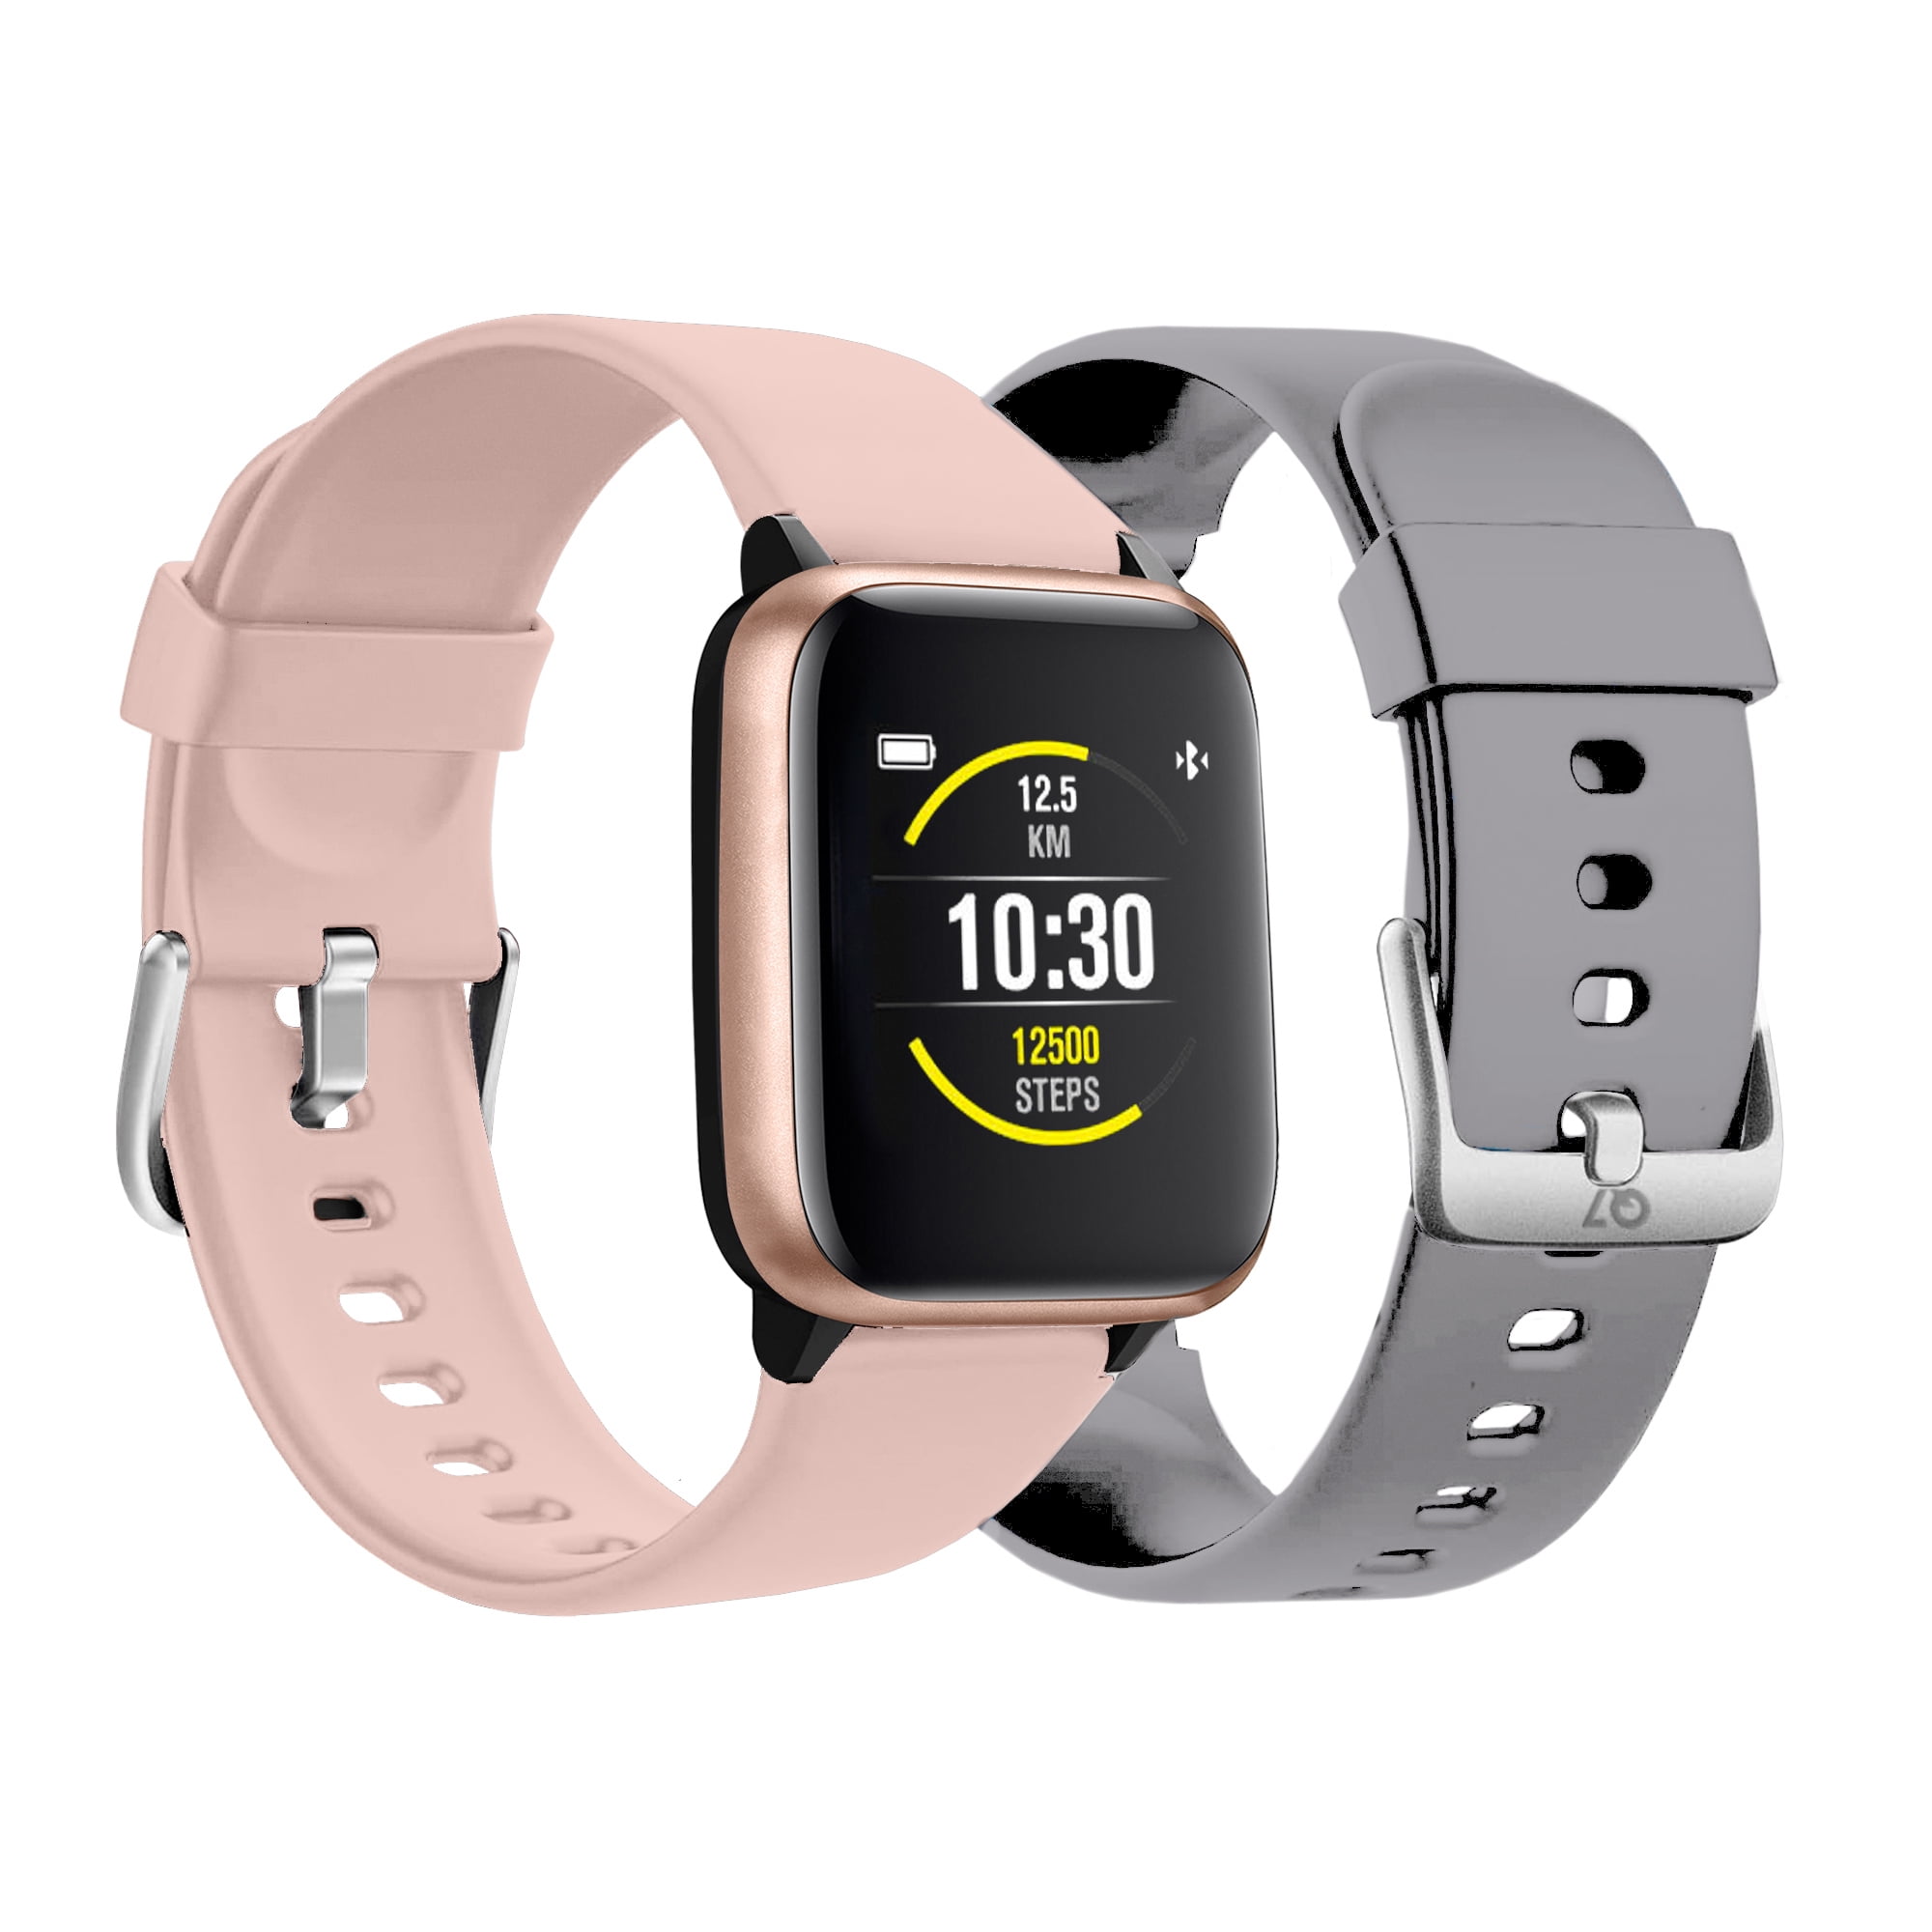 Q7 Smartwatch Fitness with Interchangeable Straps Compatible w iOS & Android (Blush/Grey) - Walmart.com